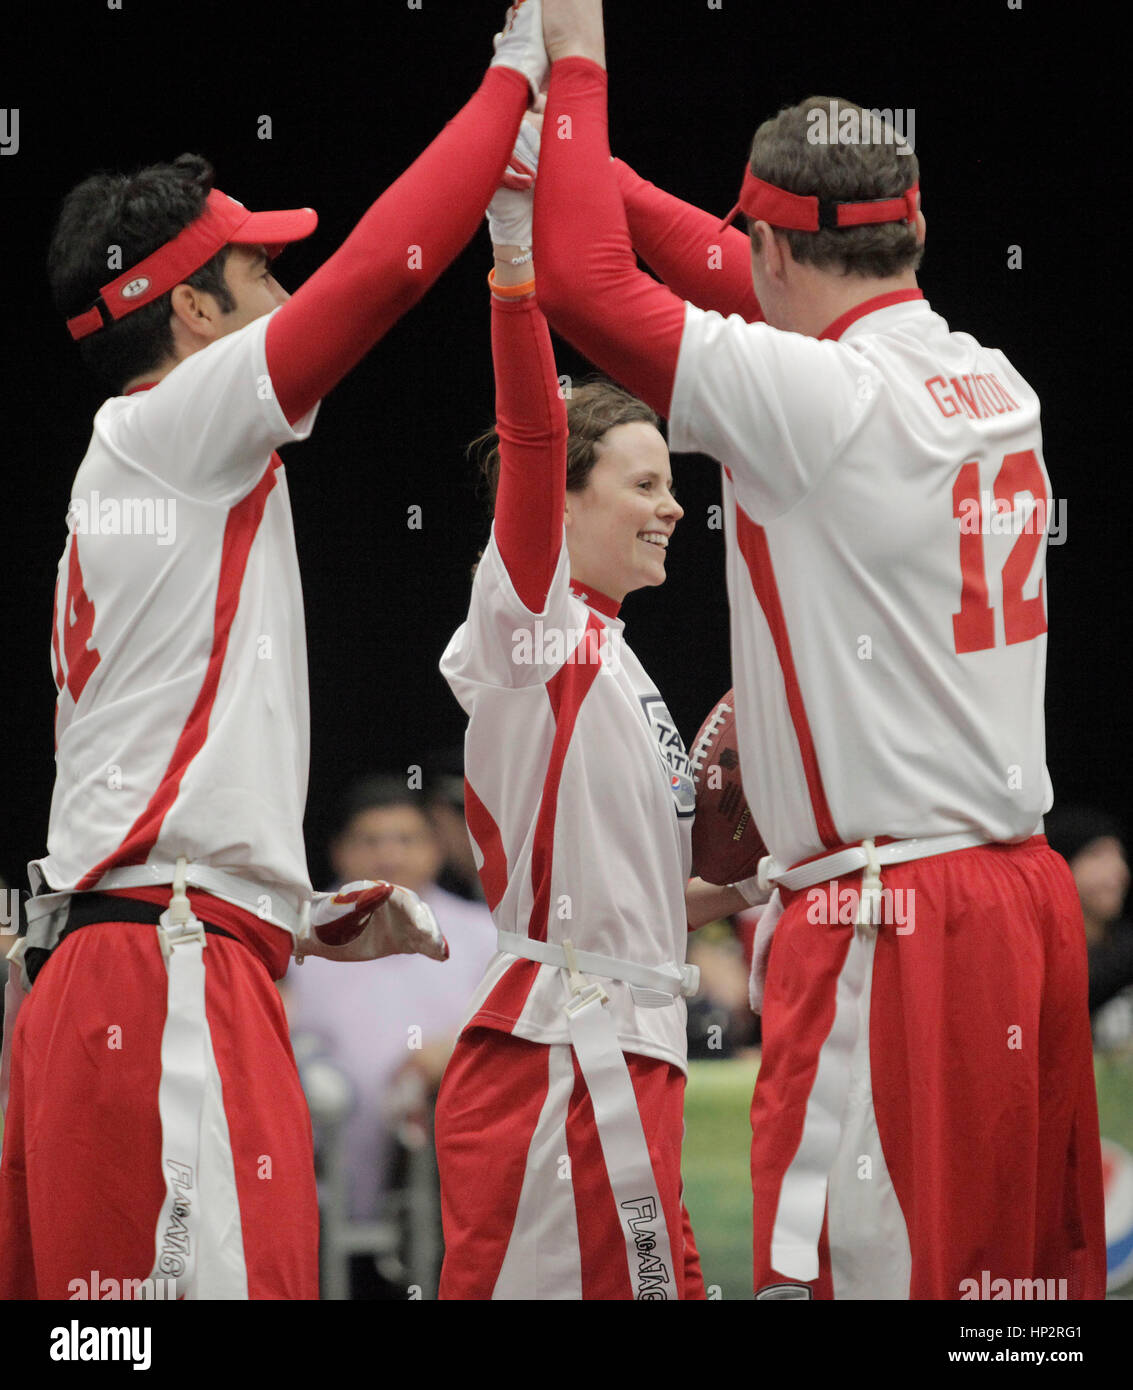 Sarah Ramos, center, celebrates her touch down with teammates Felipe Viel, left, and Rich Gannon at the Tazon Latino V flag football game at Super Bowl NFL Experience at the Dallas Convention Center on February 2, 2011 in Dallas, Texas. Photo by Francis Specker Stock Photo